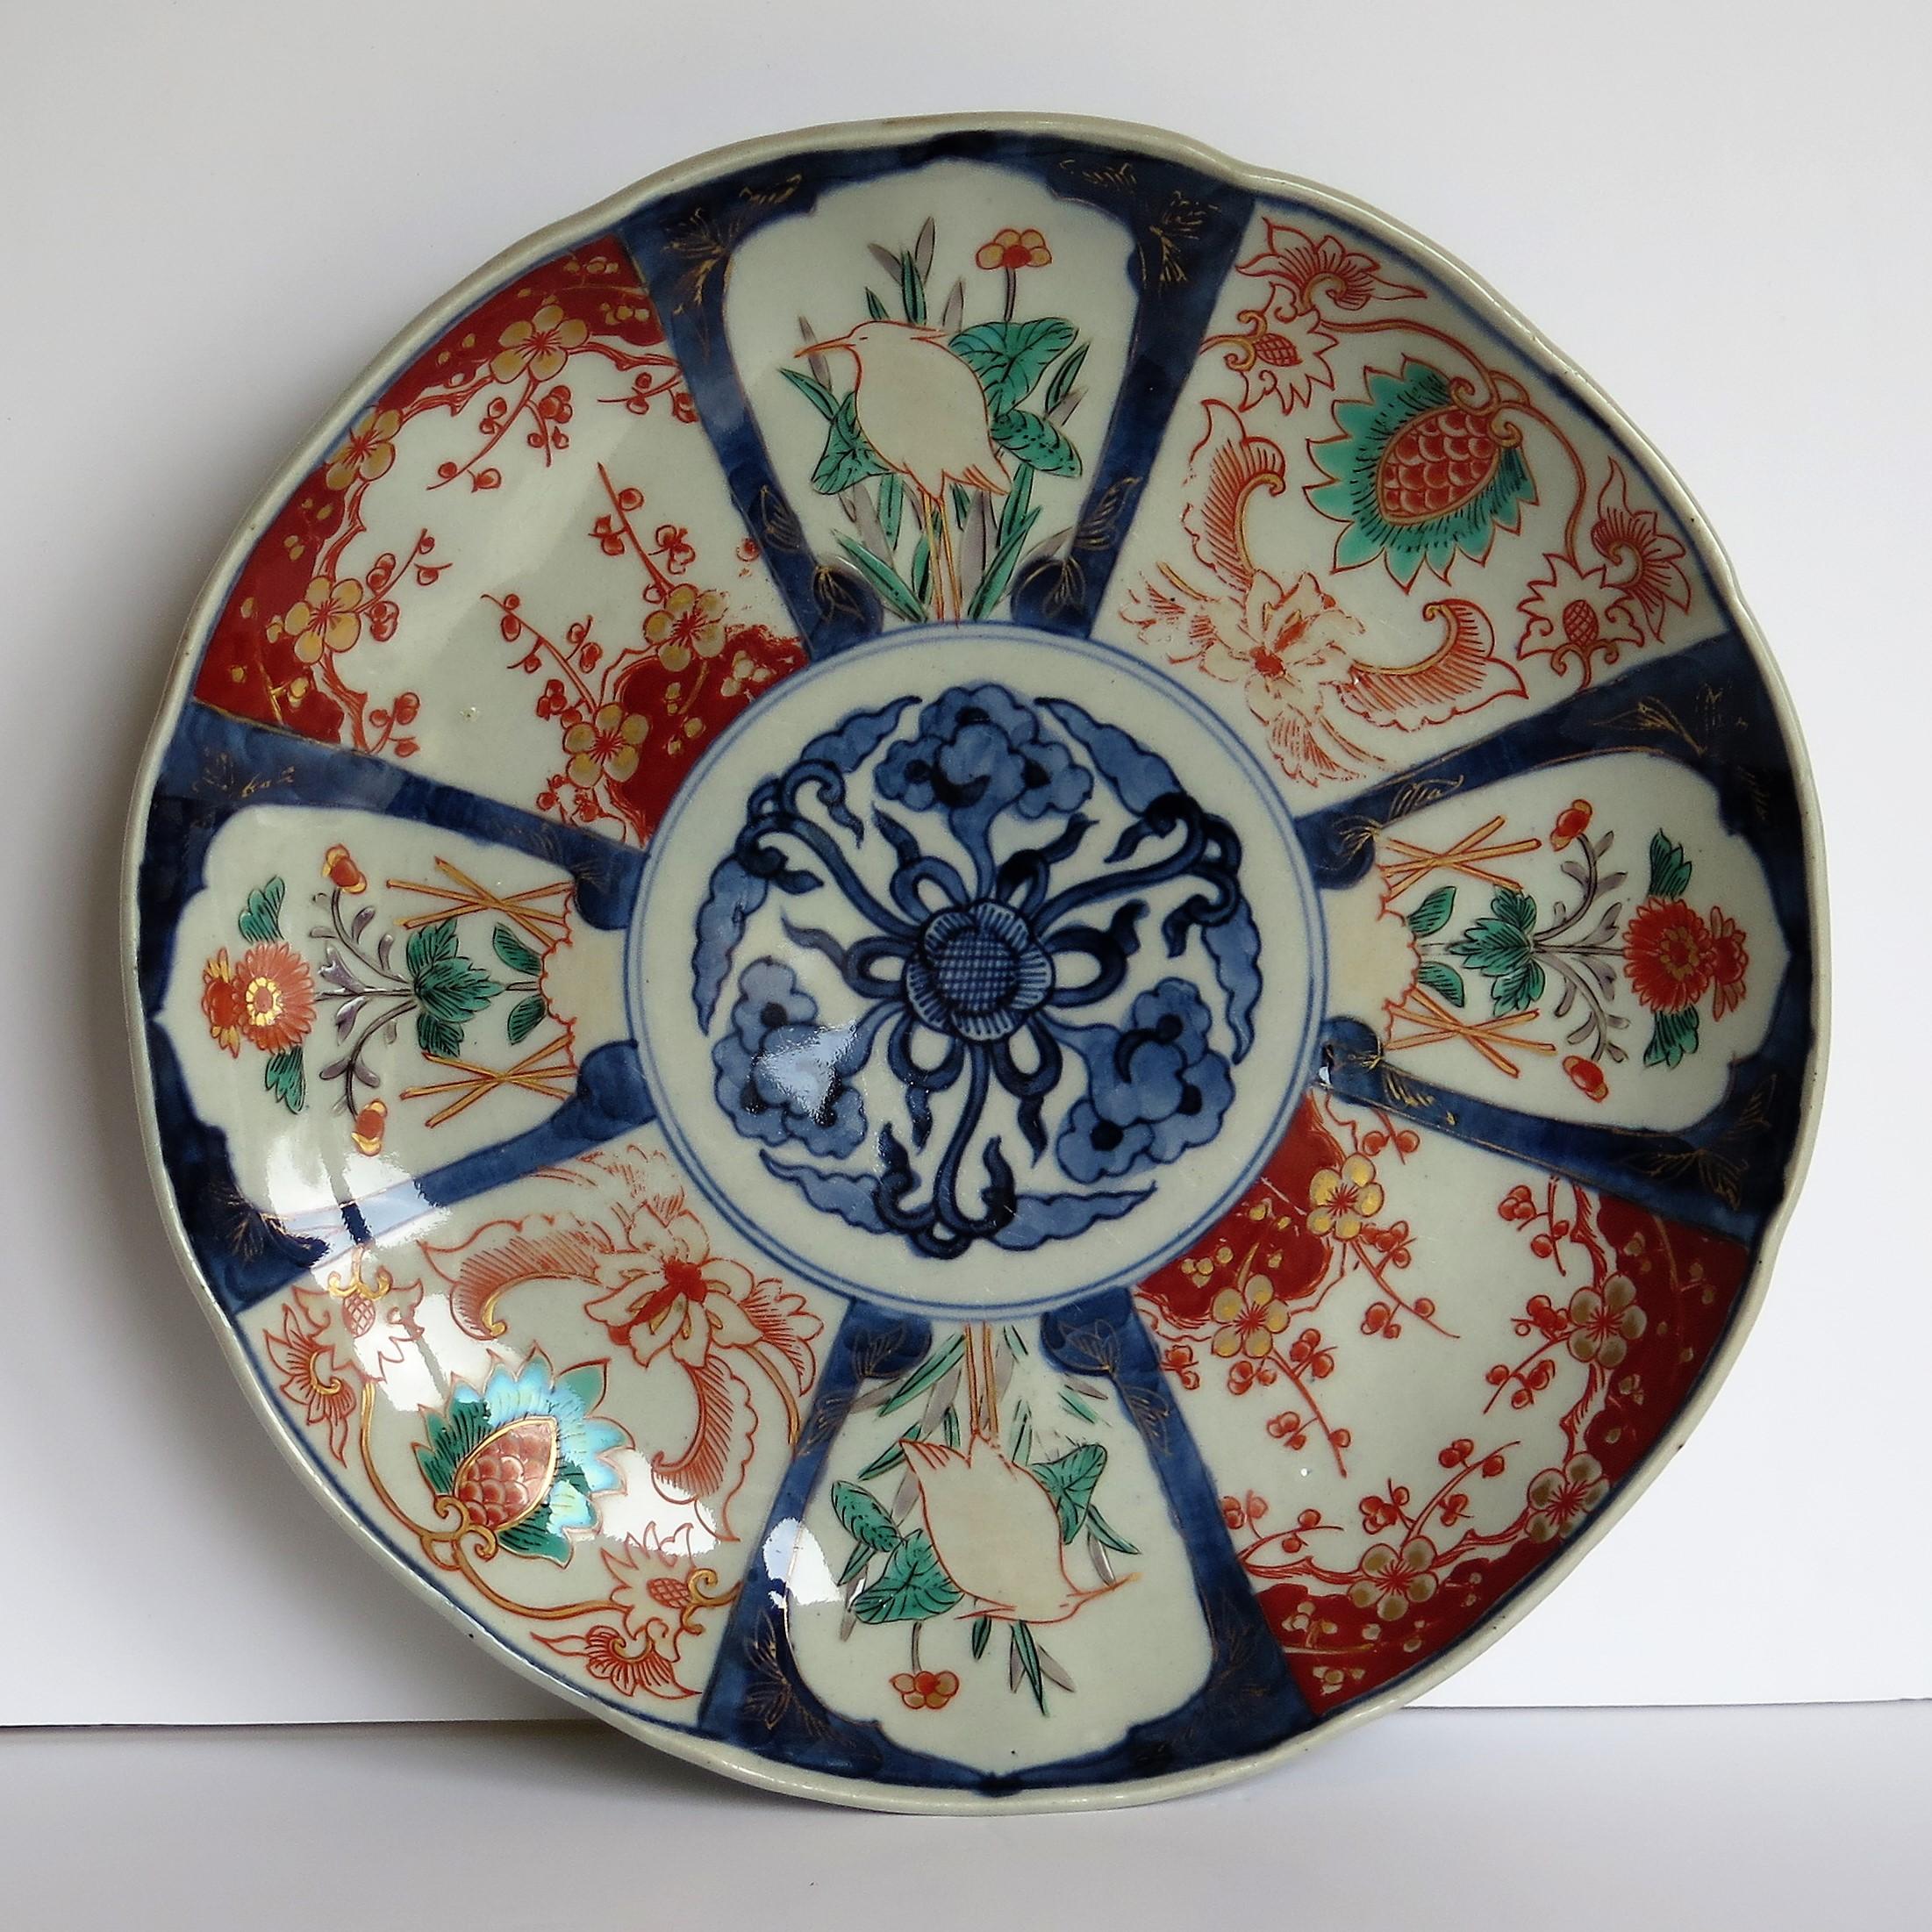 This is a nice quality Japanese porcelain Small Charger, large plate or bowl with an Imari pattern, dating to the mid-late 19th century, Meiji period, circa 1870.

The plate or charger is quite deep with a lobed cavetto and rim. 

It is hand